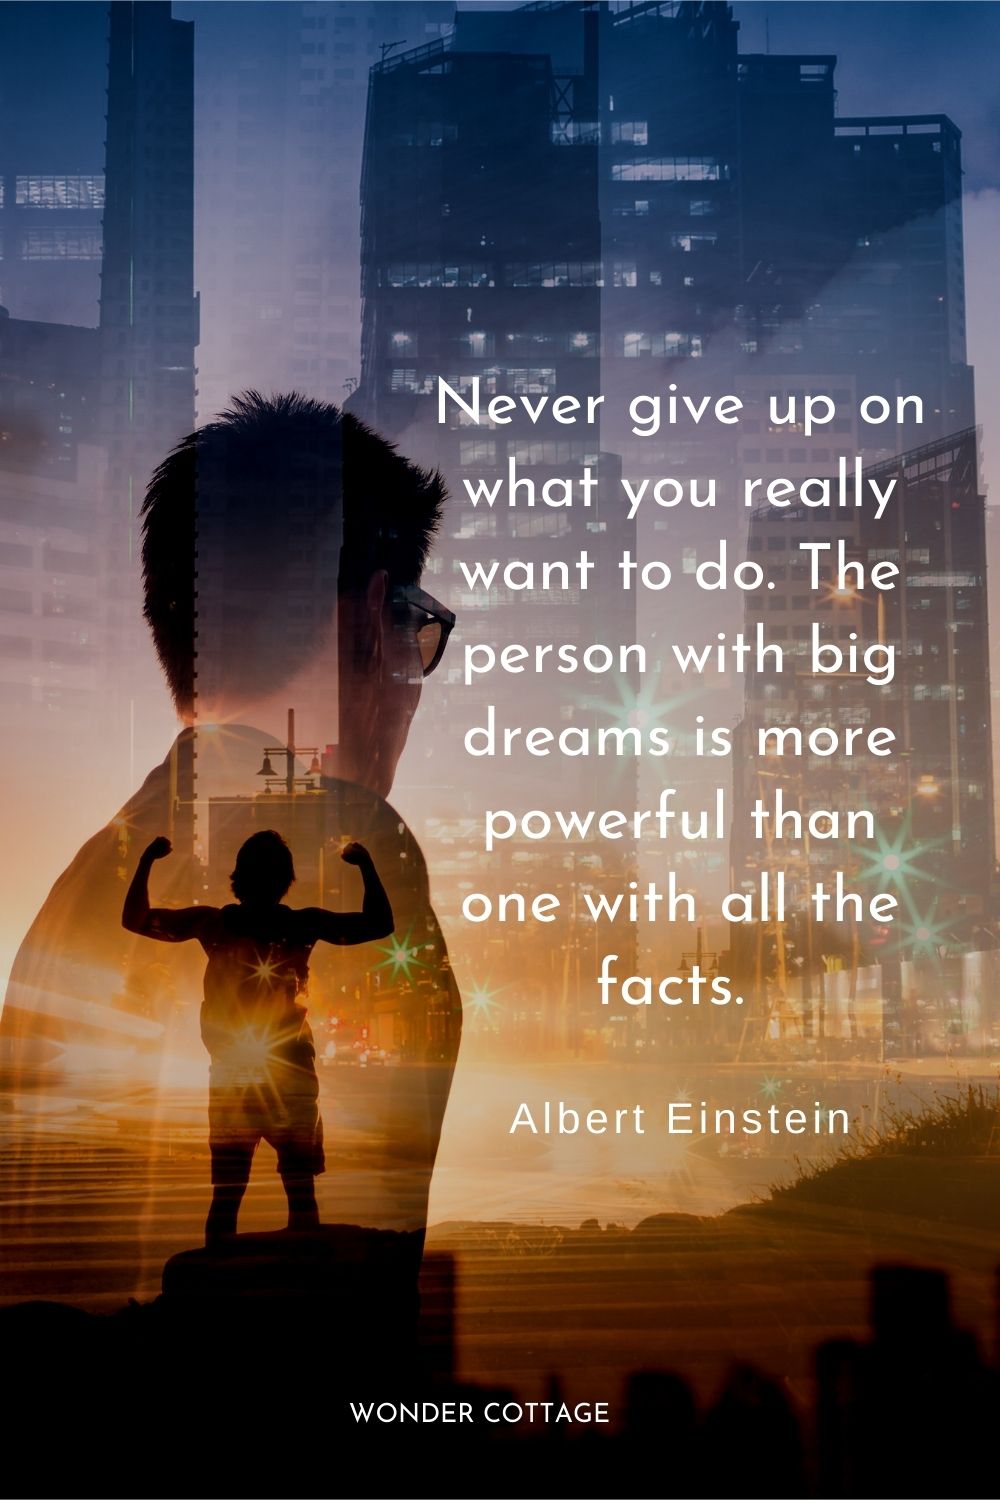 Never give up on what you really want to do. The person with big dreams is more powerful than one with all the facts.  Albert Einstein